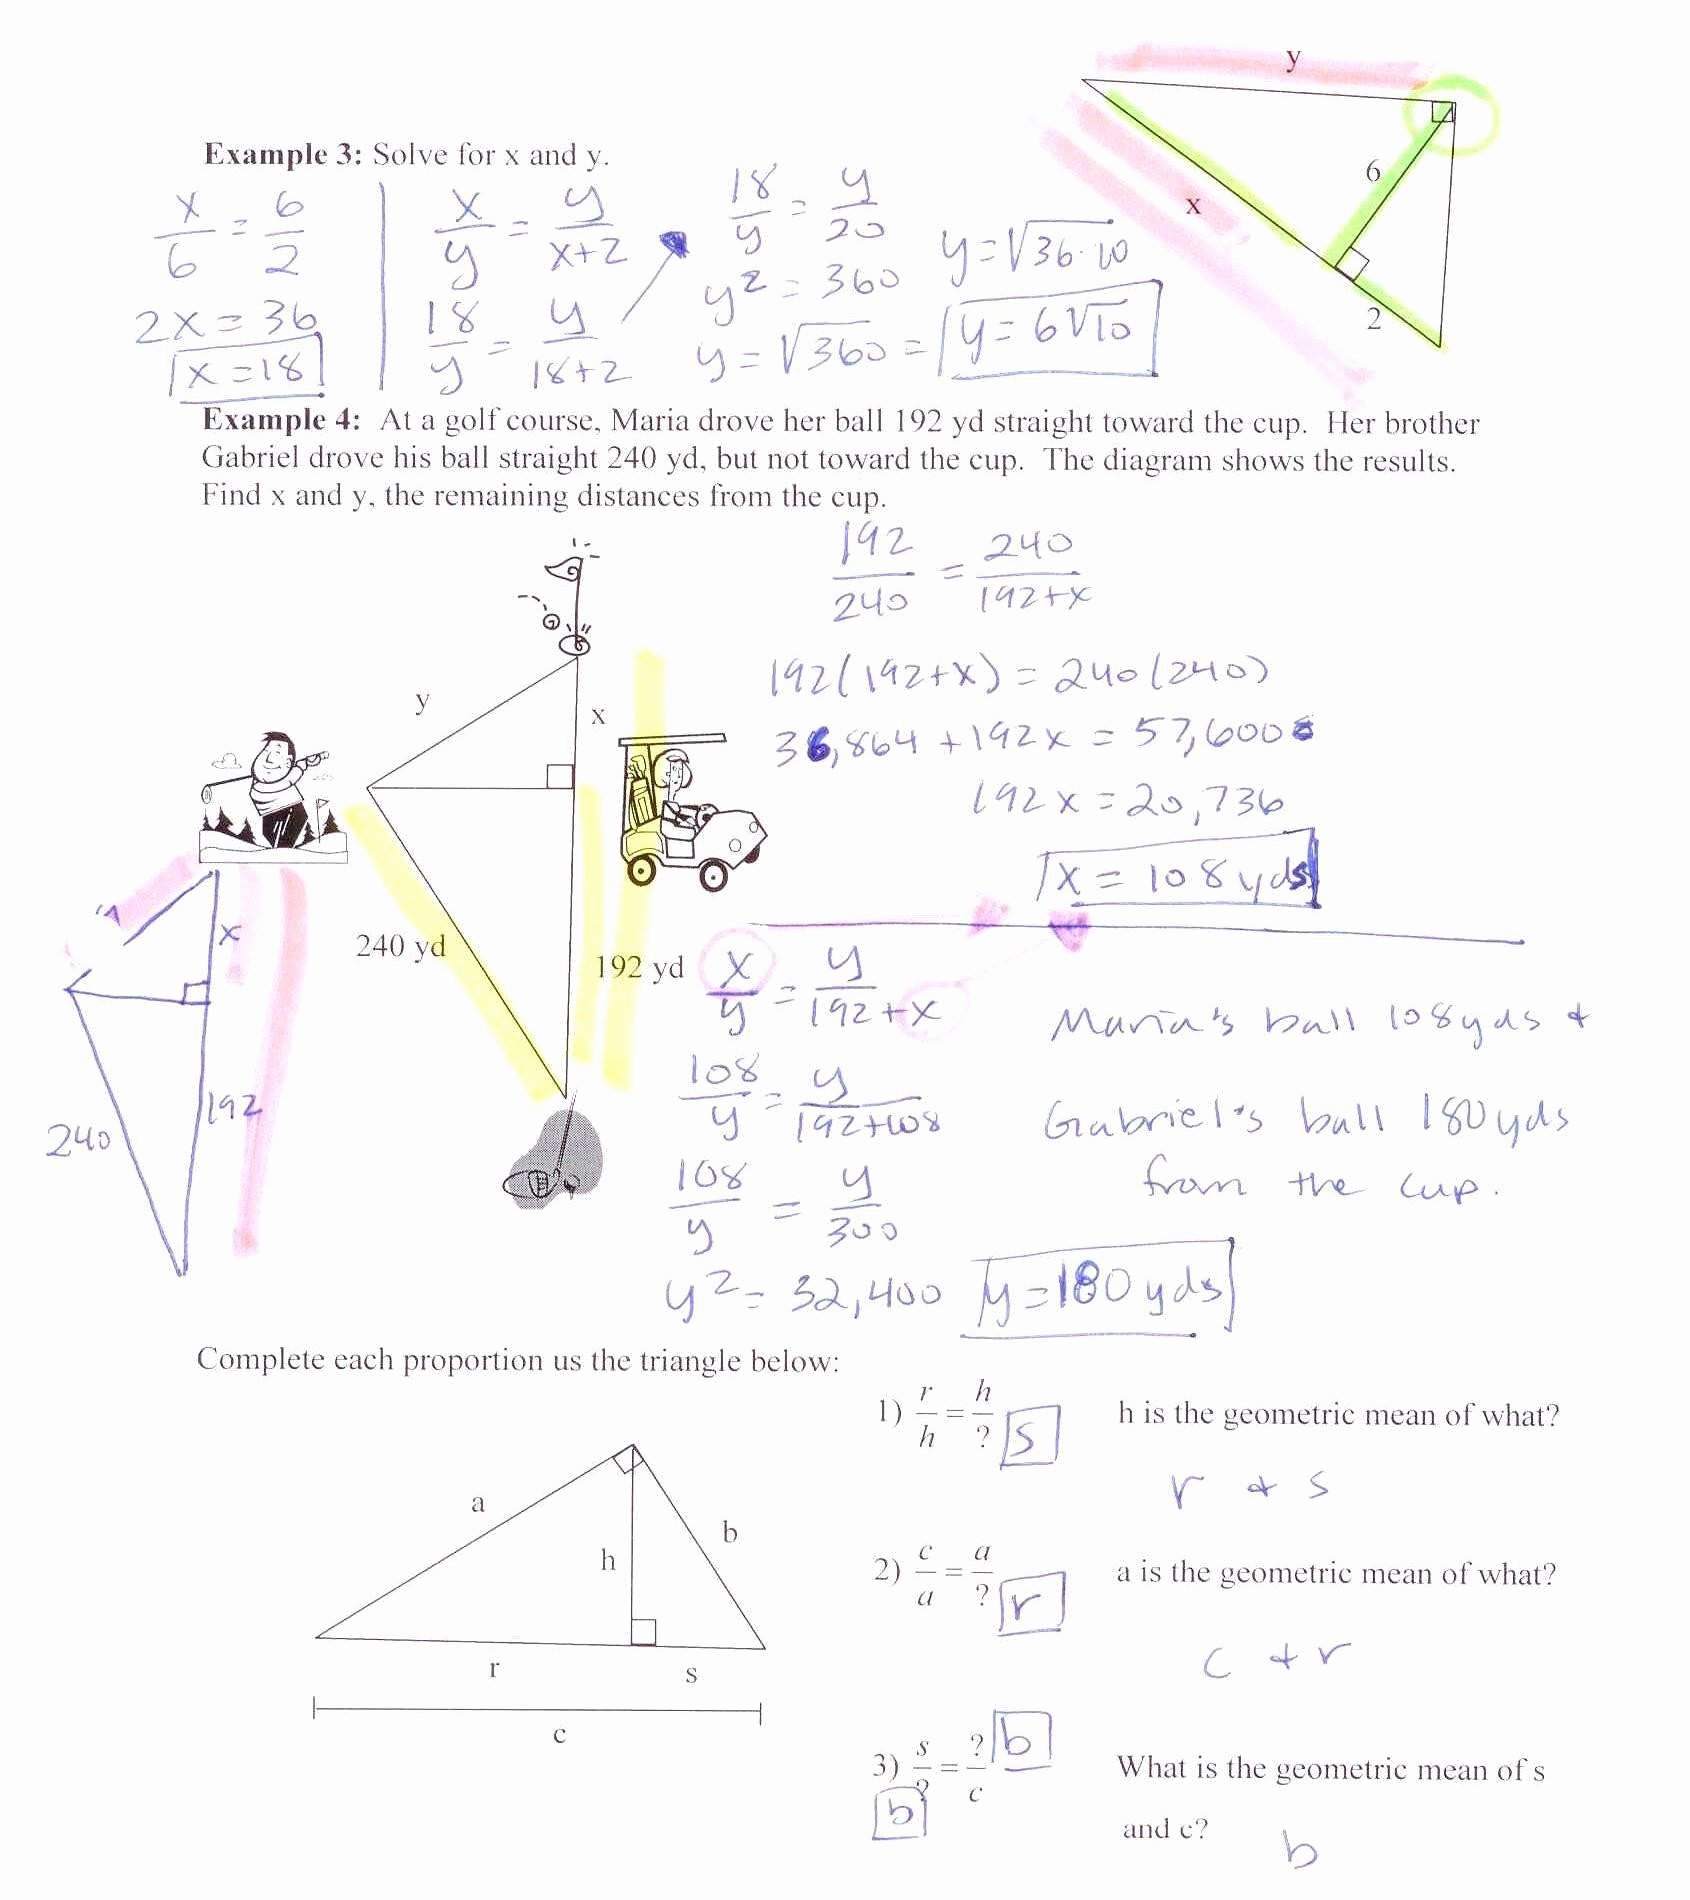 Congruent Triangles Worksheet with Answers Luxury Geometry Worksheet Congruent Triangles Sss and Sas Answers